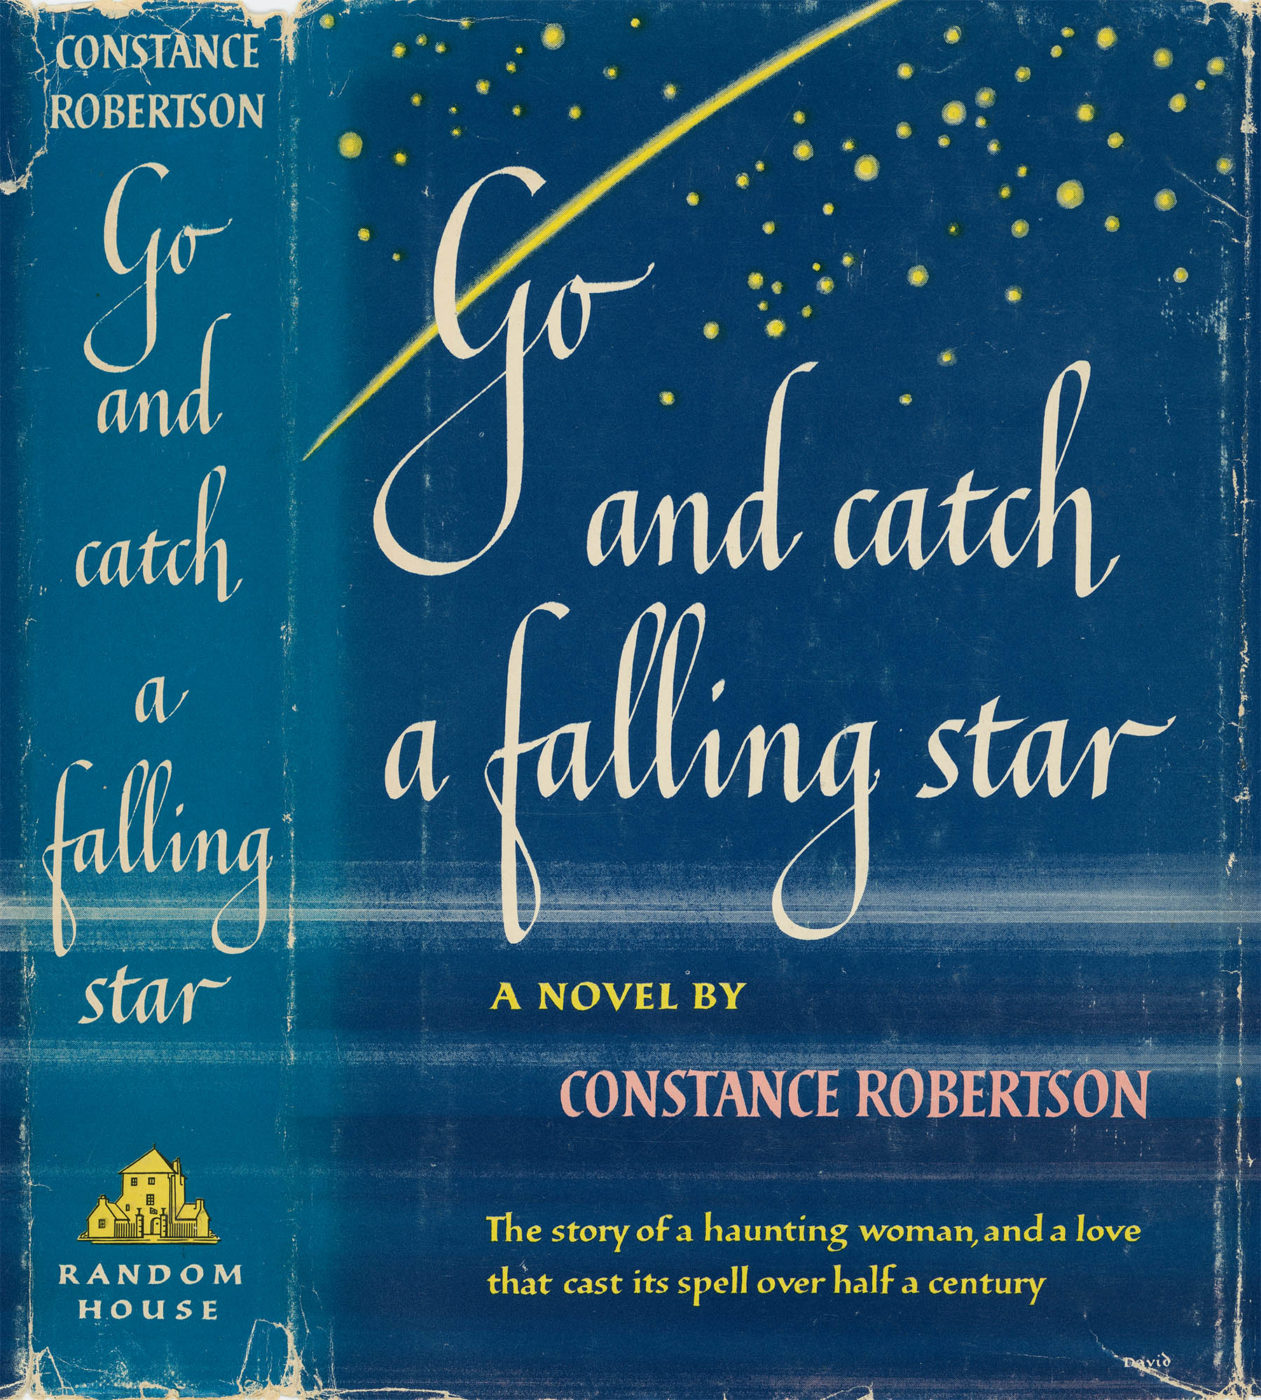 Book jacket of Go and catch a falling star